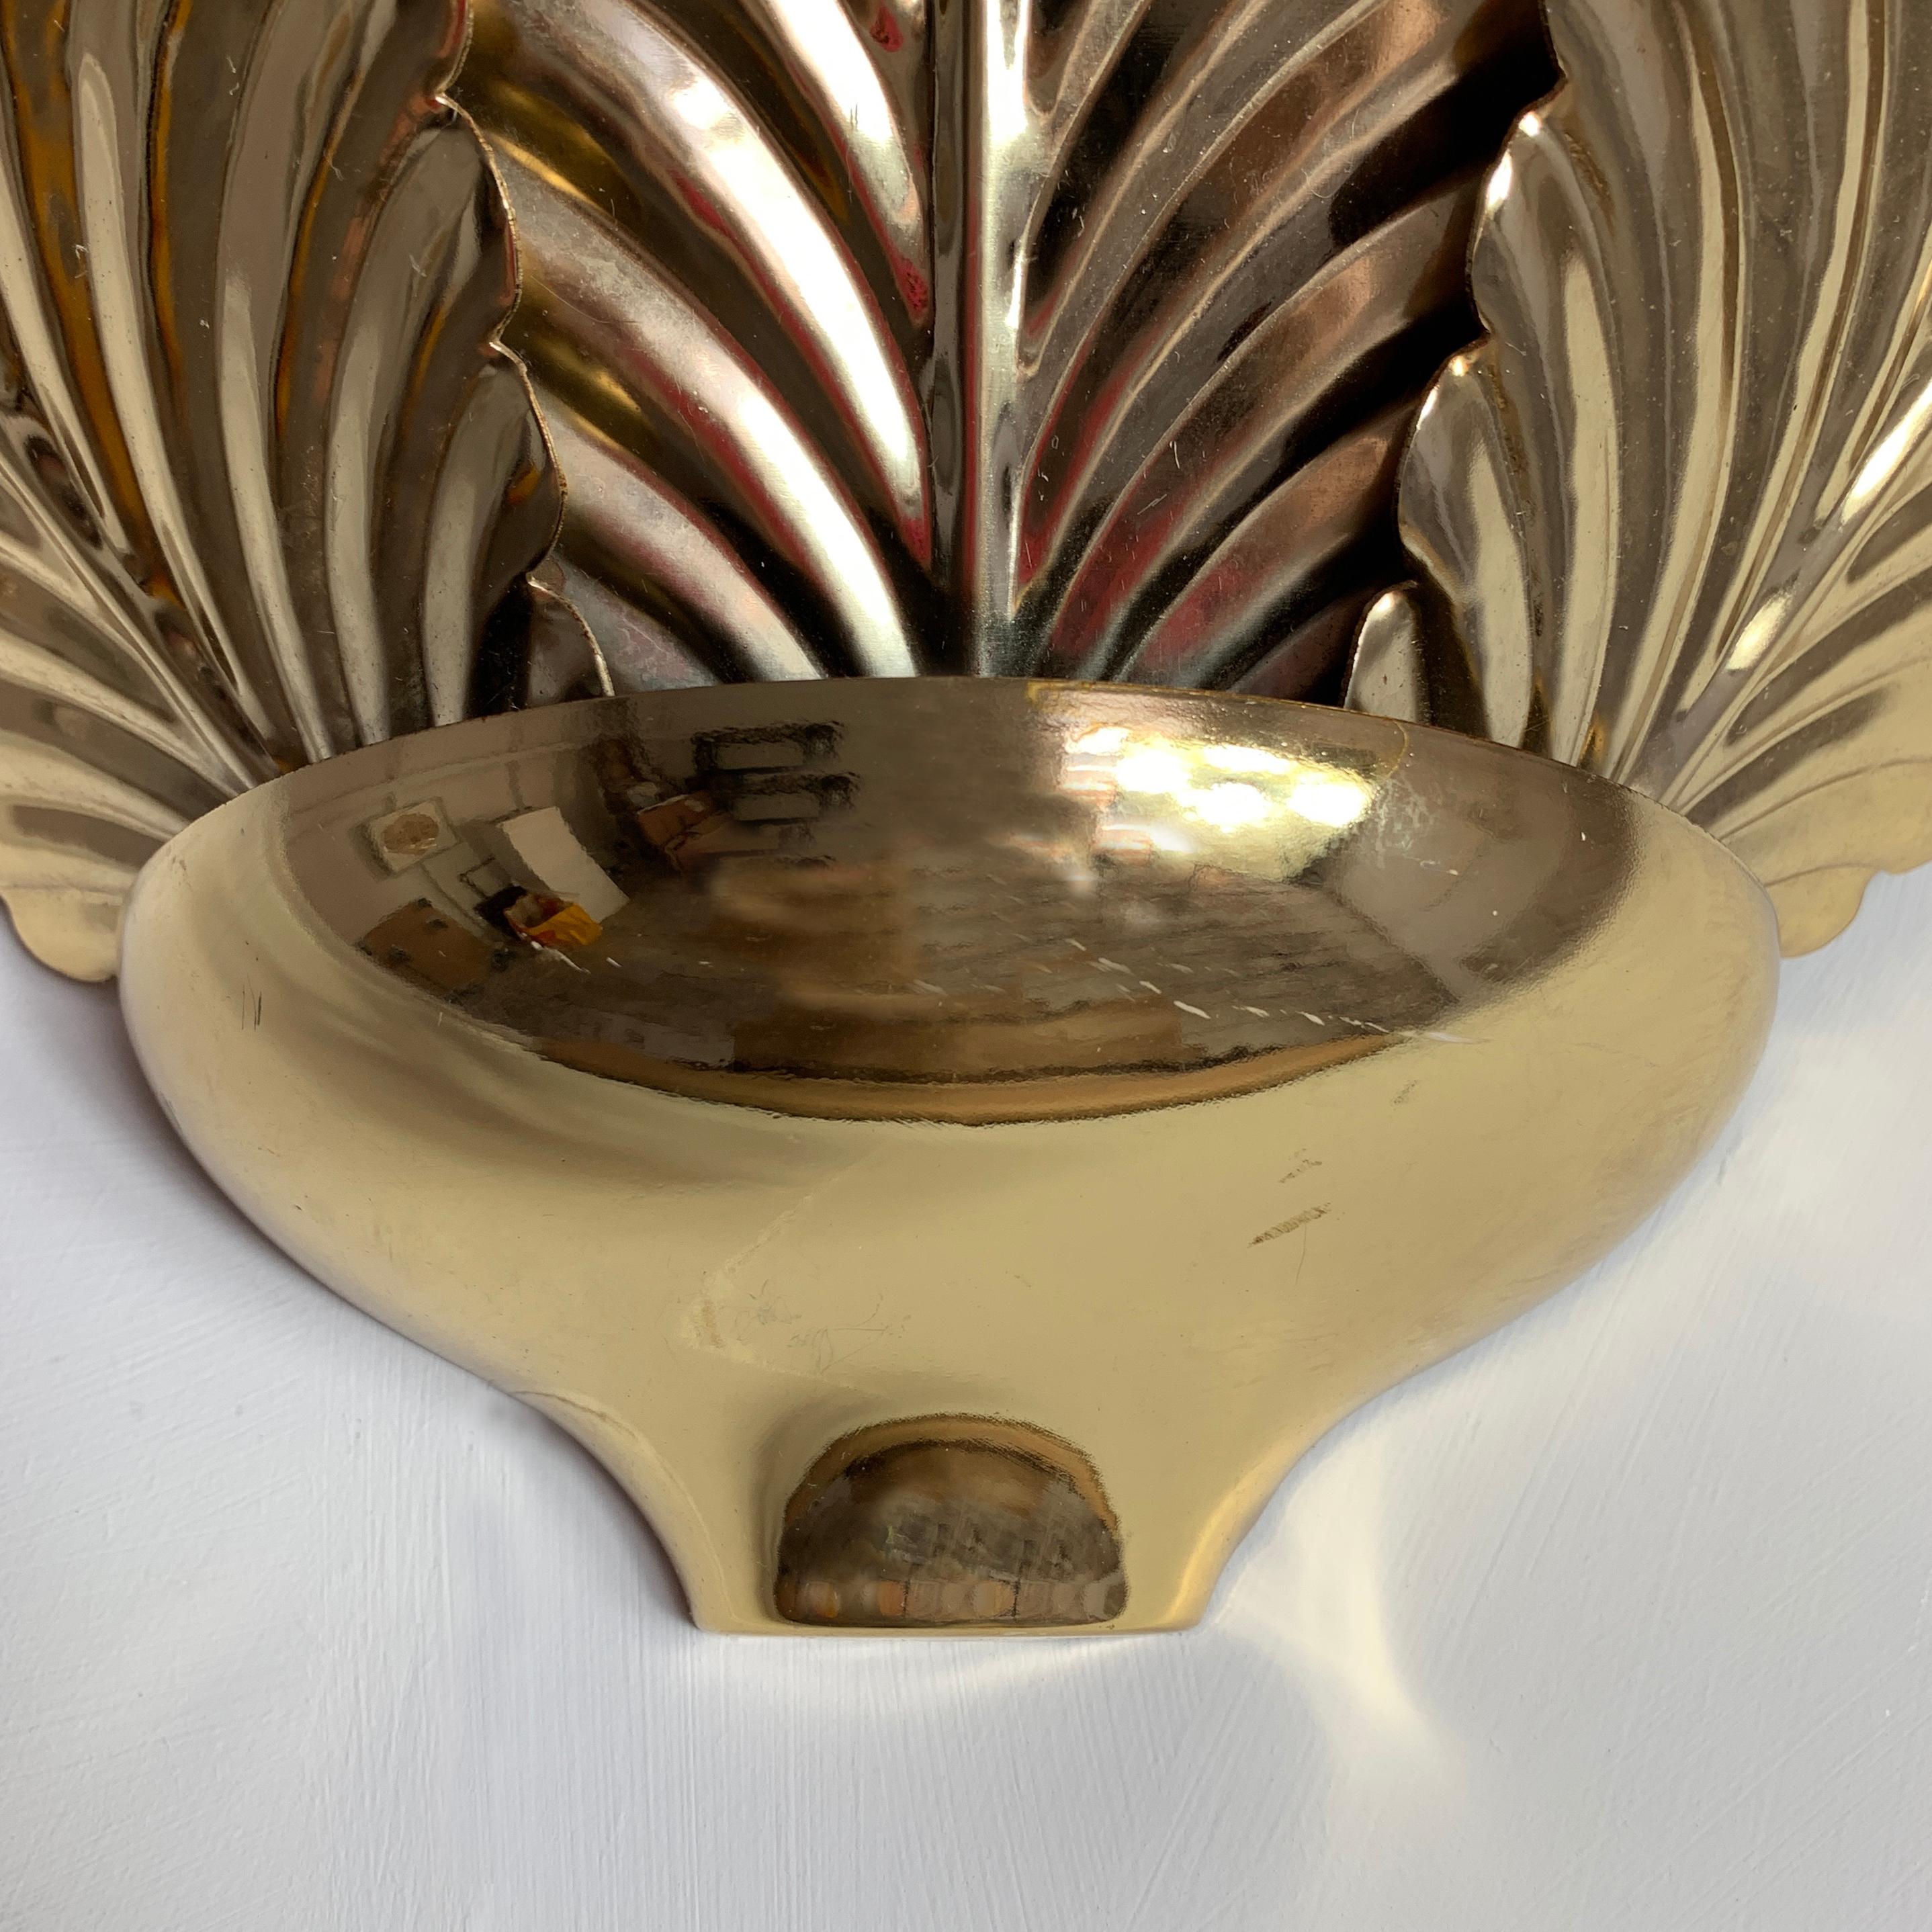 Gold palm leaf wall sconce uplighter.
1980s.
3 large shiny gold metal palm leaves sit inside a gold cup shaped base.
Behind the leaves a single E27 bulb holder is hidden.
There is a bar with 2 hanging hooks on the back to attach to the